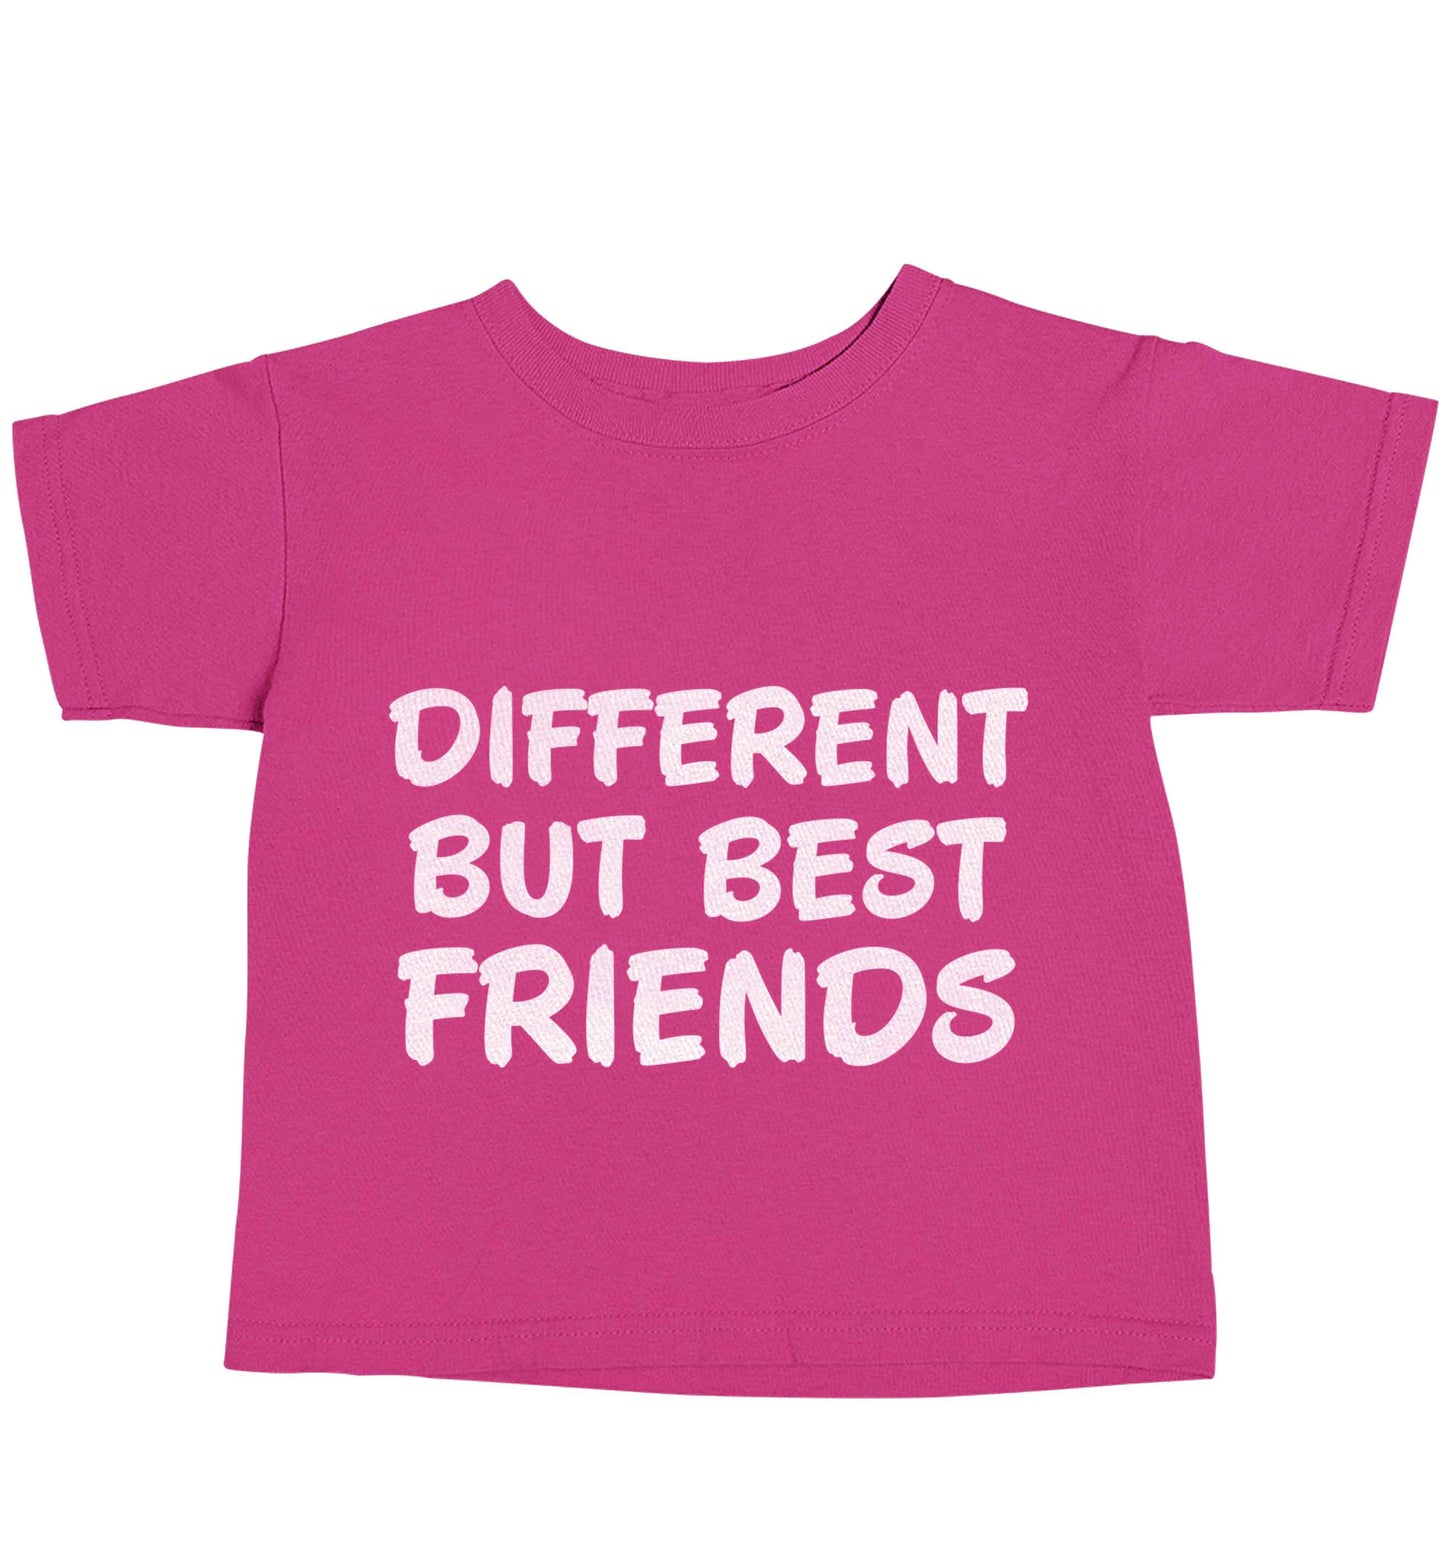 Different but best friends pink baby toddler Tshirt 2 Years